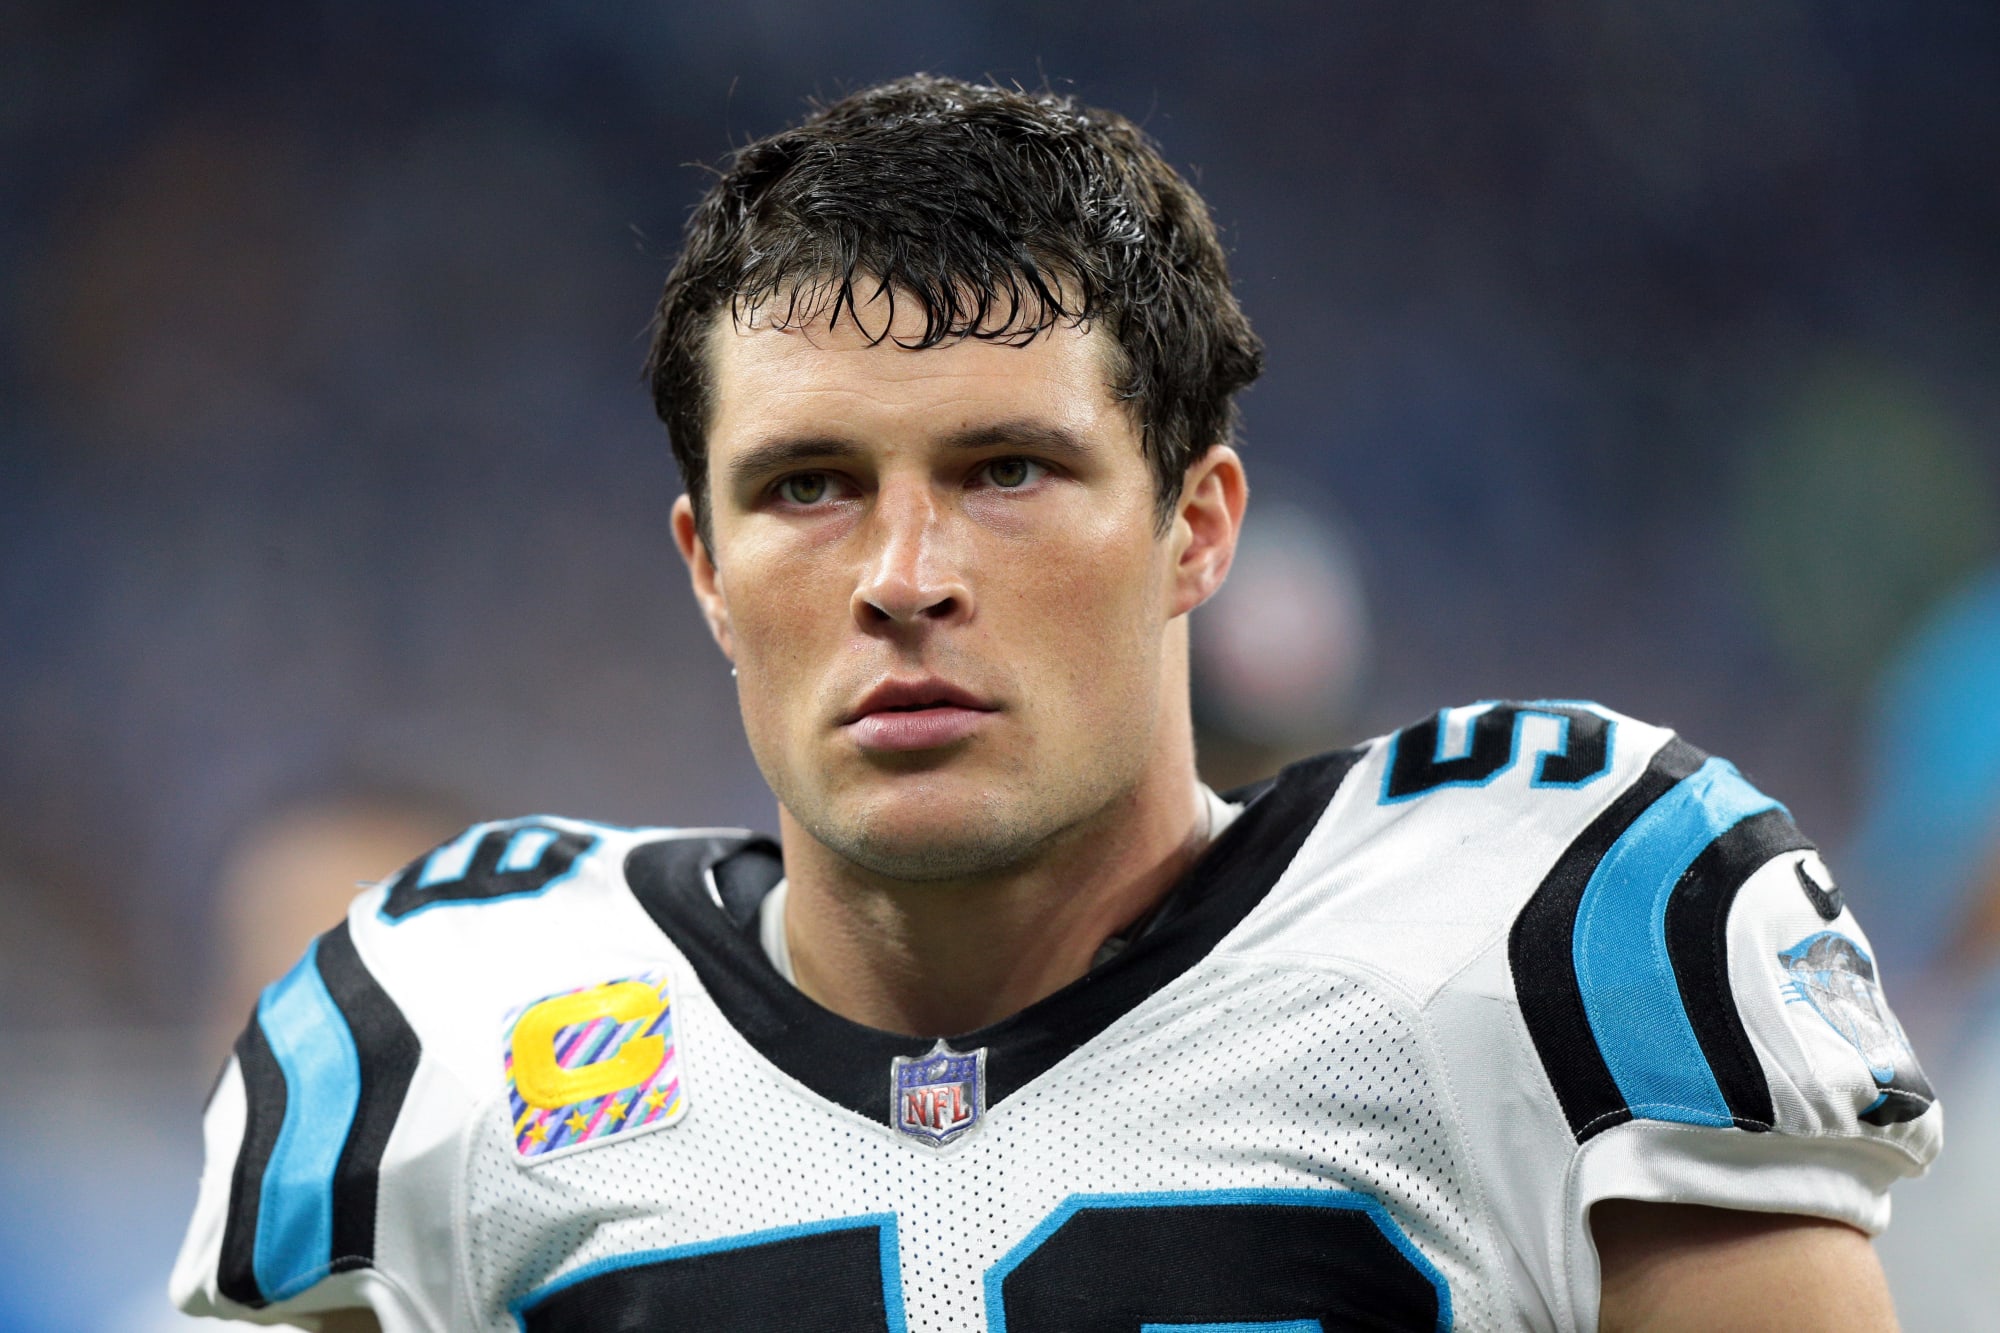 How many concussions has Luke Kuechly suffered in his career?